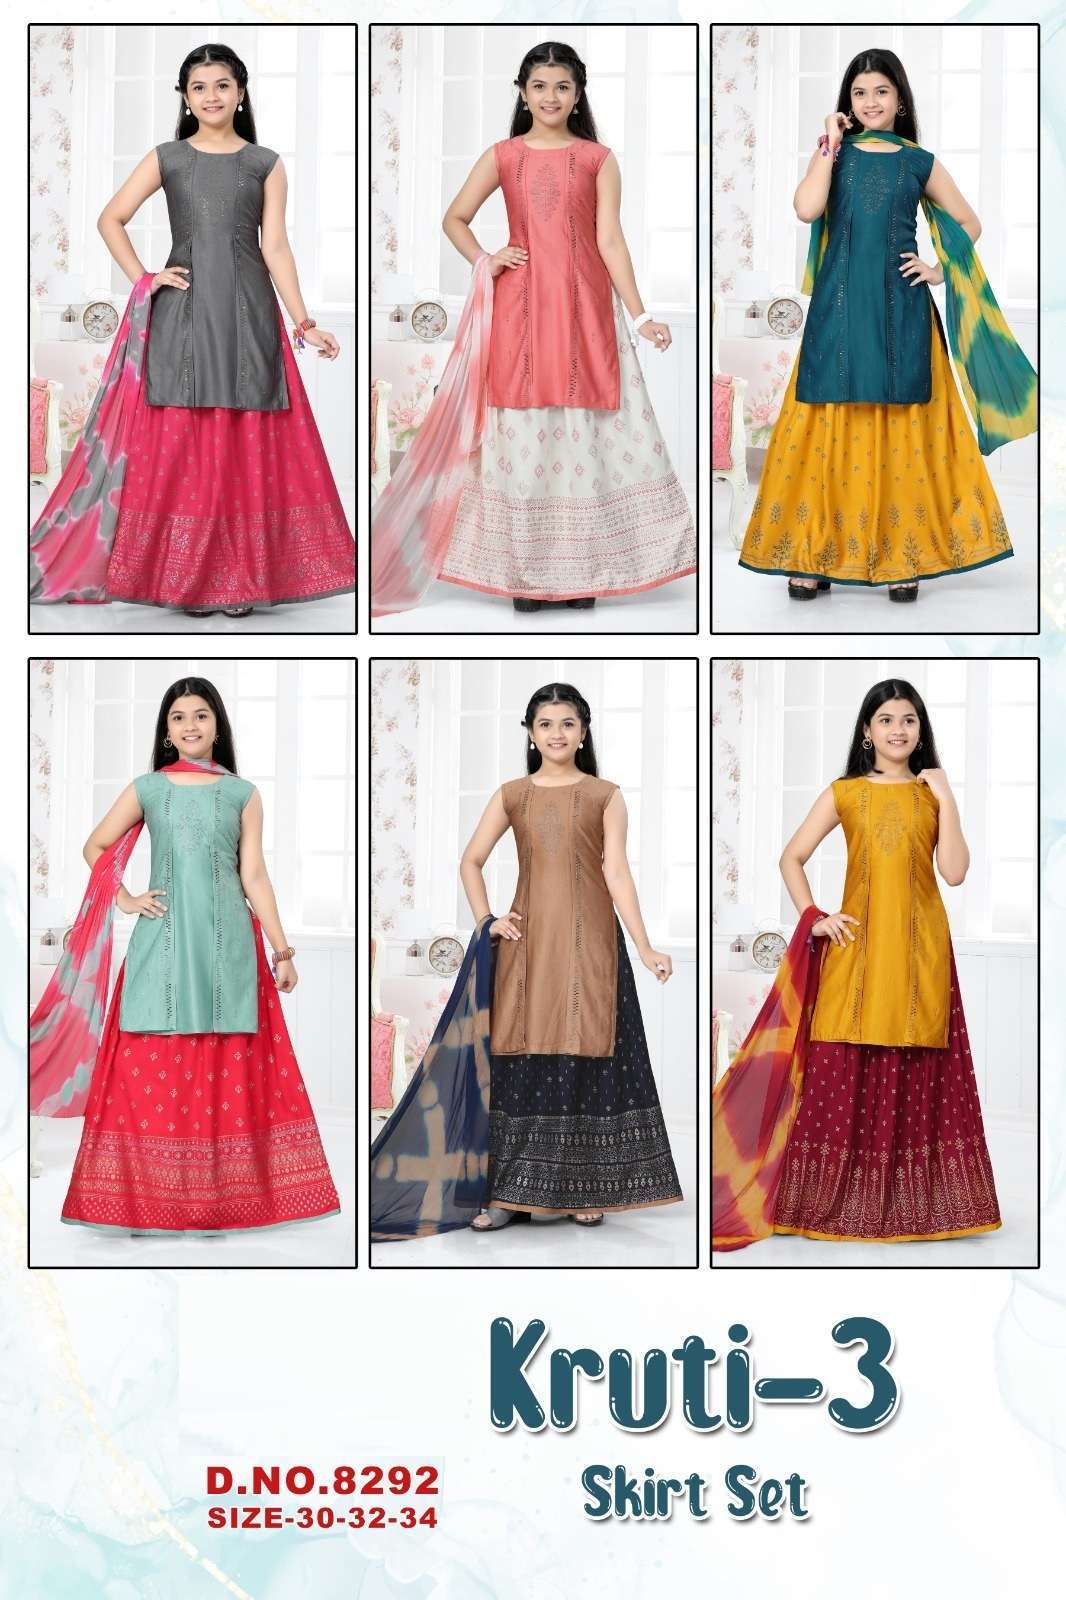 Latest 50 Kurti Skirt Designs And Patterns (2022) - Tips and Beauty | Long  kurti designs, Kurti designs, Kurti designs party wear